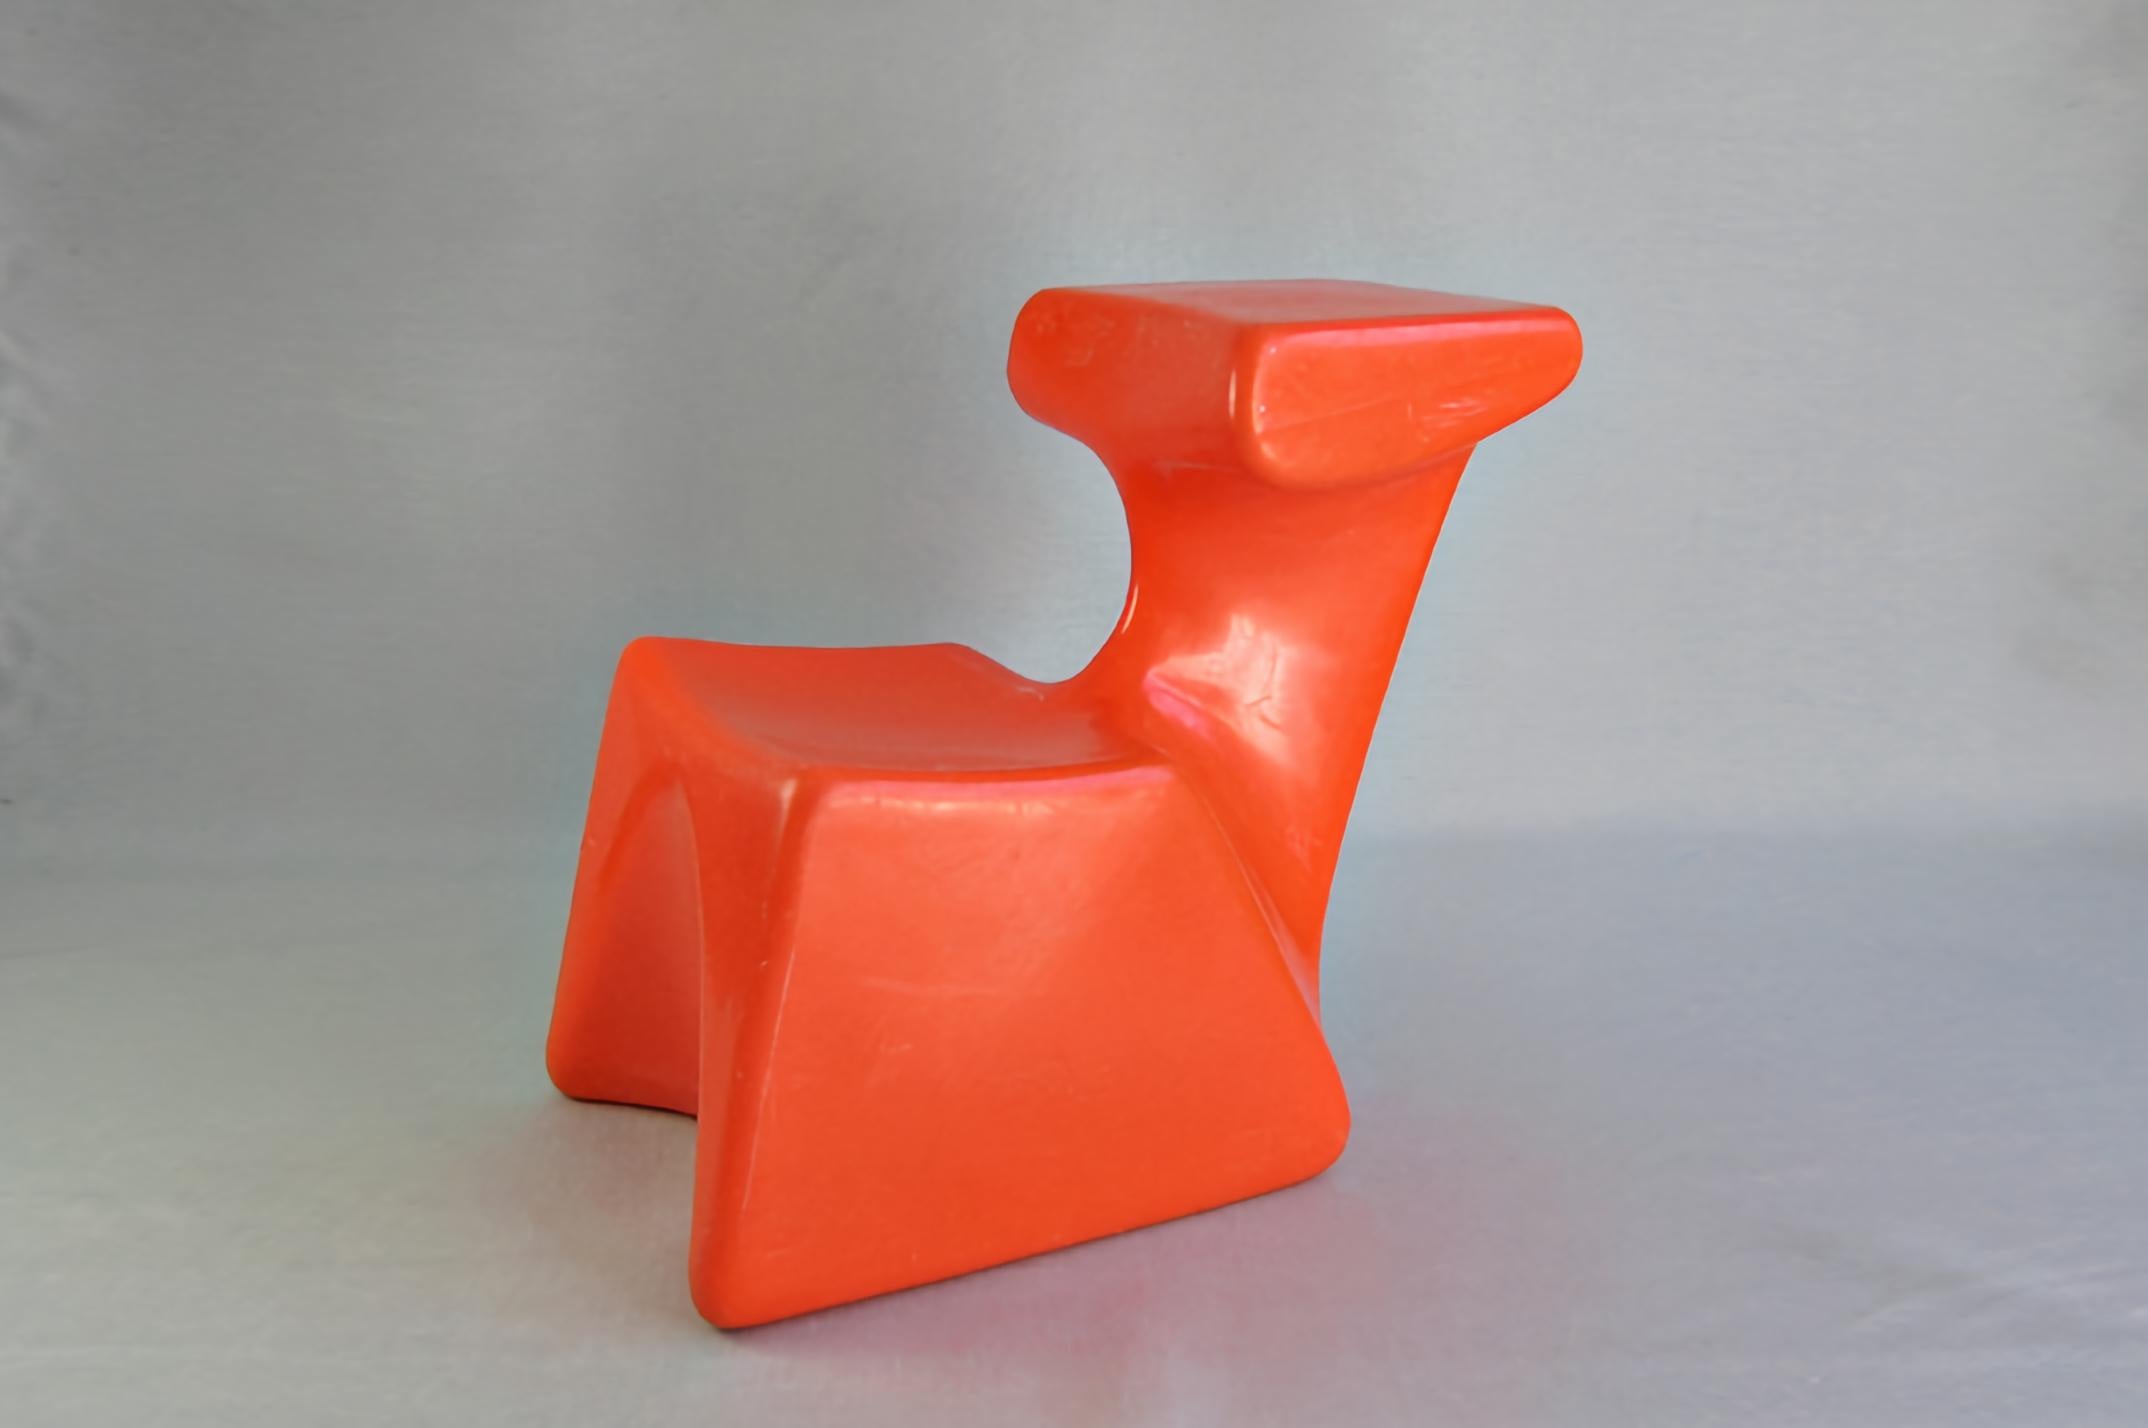 Zocker by Luigi Colani 1972
Top System Burkhard Lübke

Luigi Colani designed this chair pretty much for children. For the first time in the history of furniture design a chair for adults was developed out of a chair designed for children called